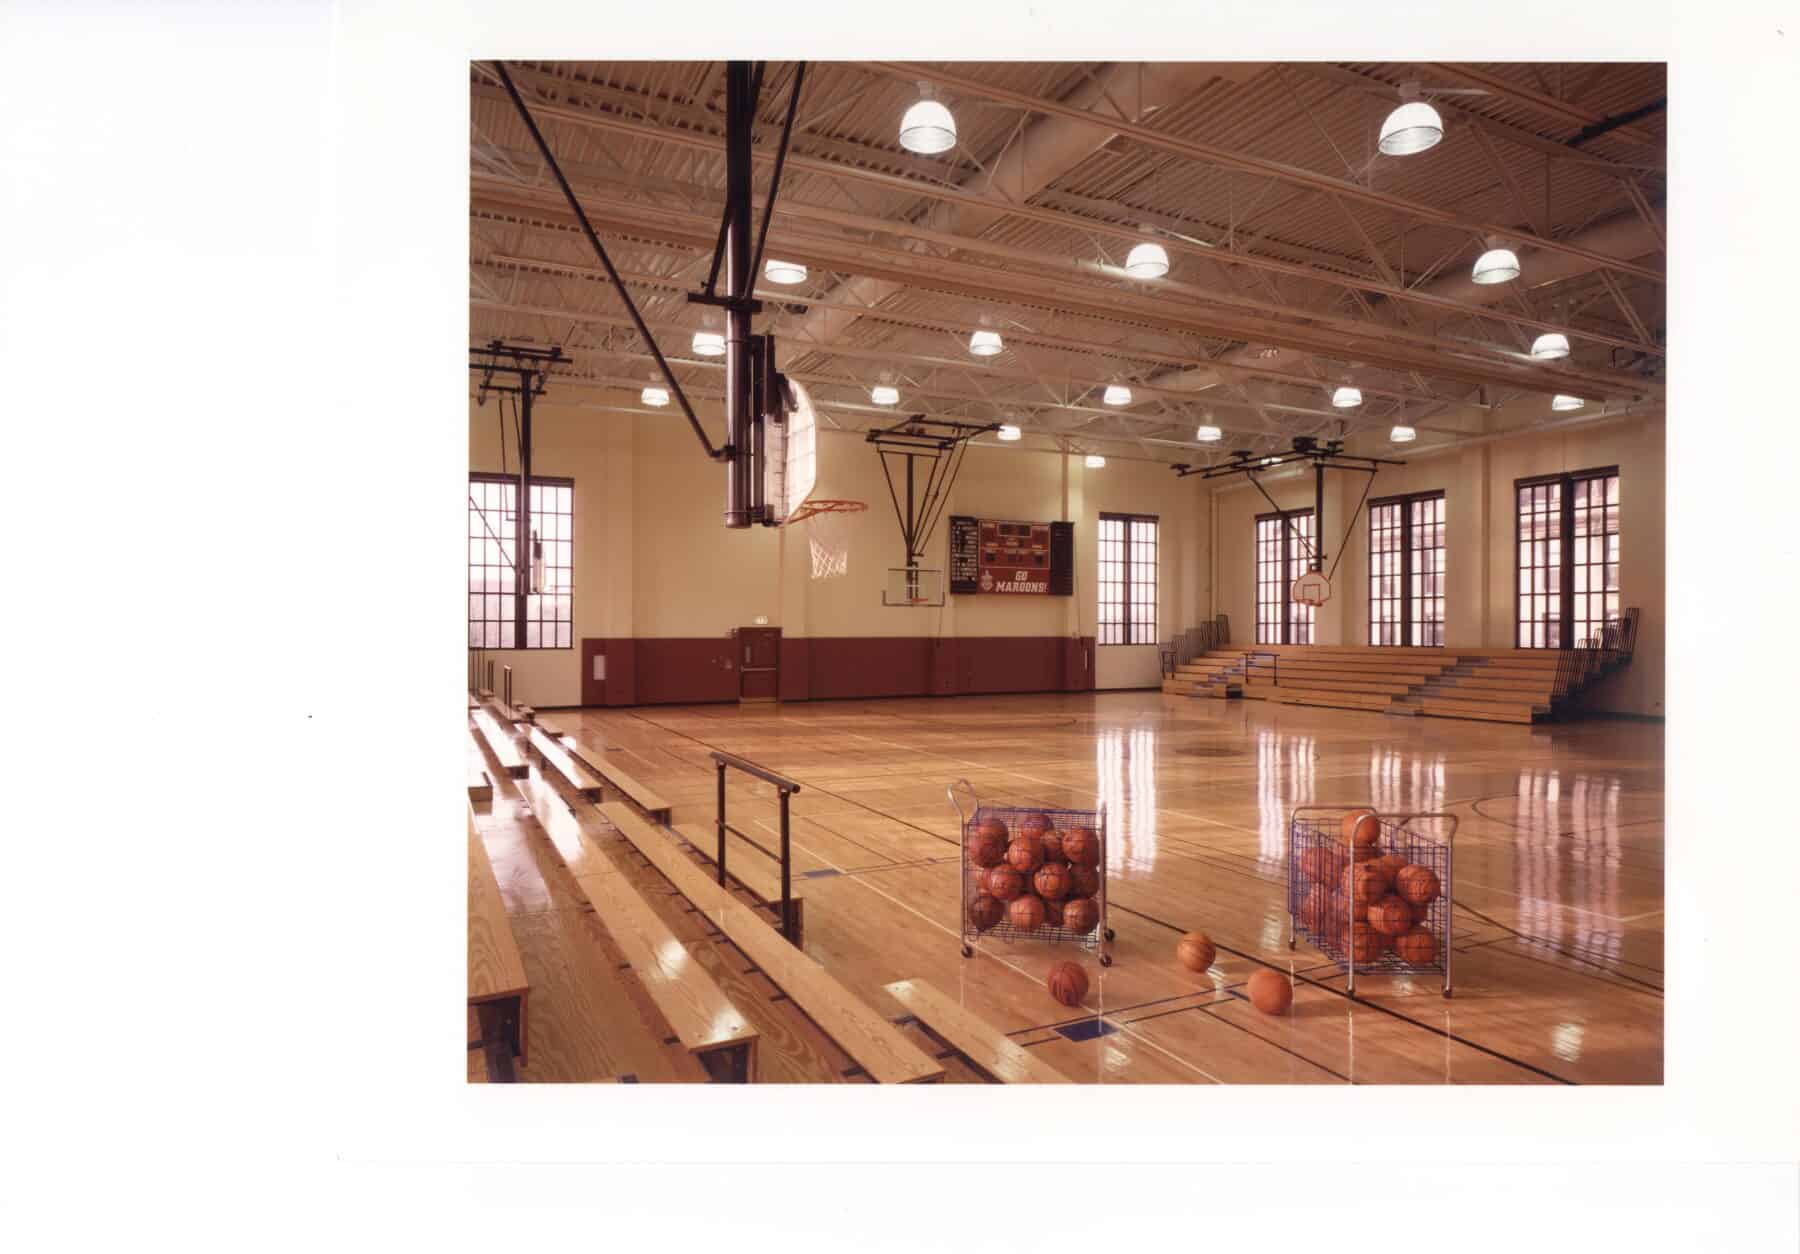 Contemporary Gymnasium Remodel in a Traditional Historic Building by Commercial Builder & General Contractor Structural Enterprises